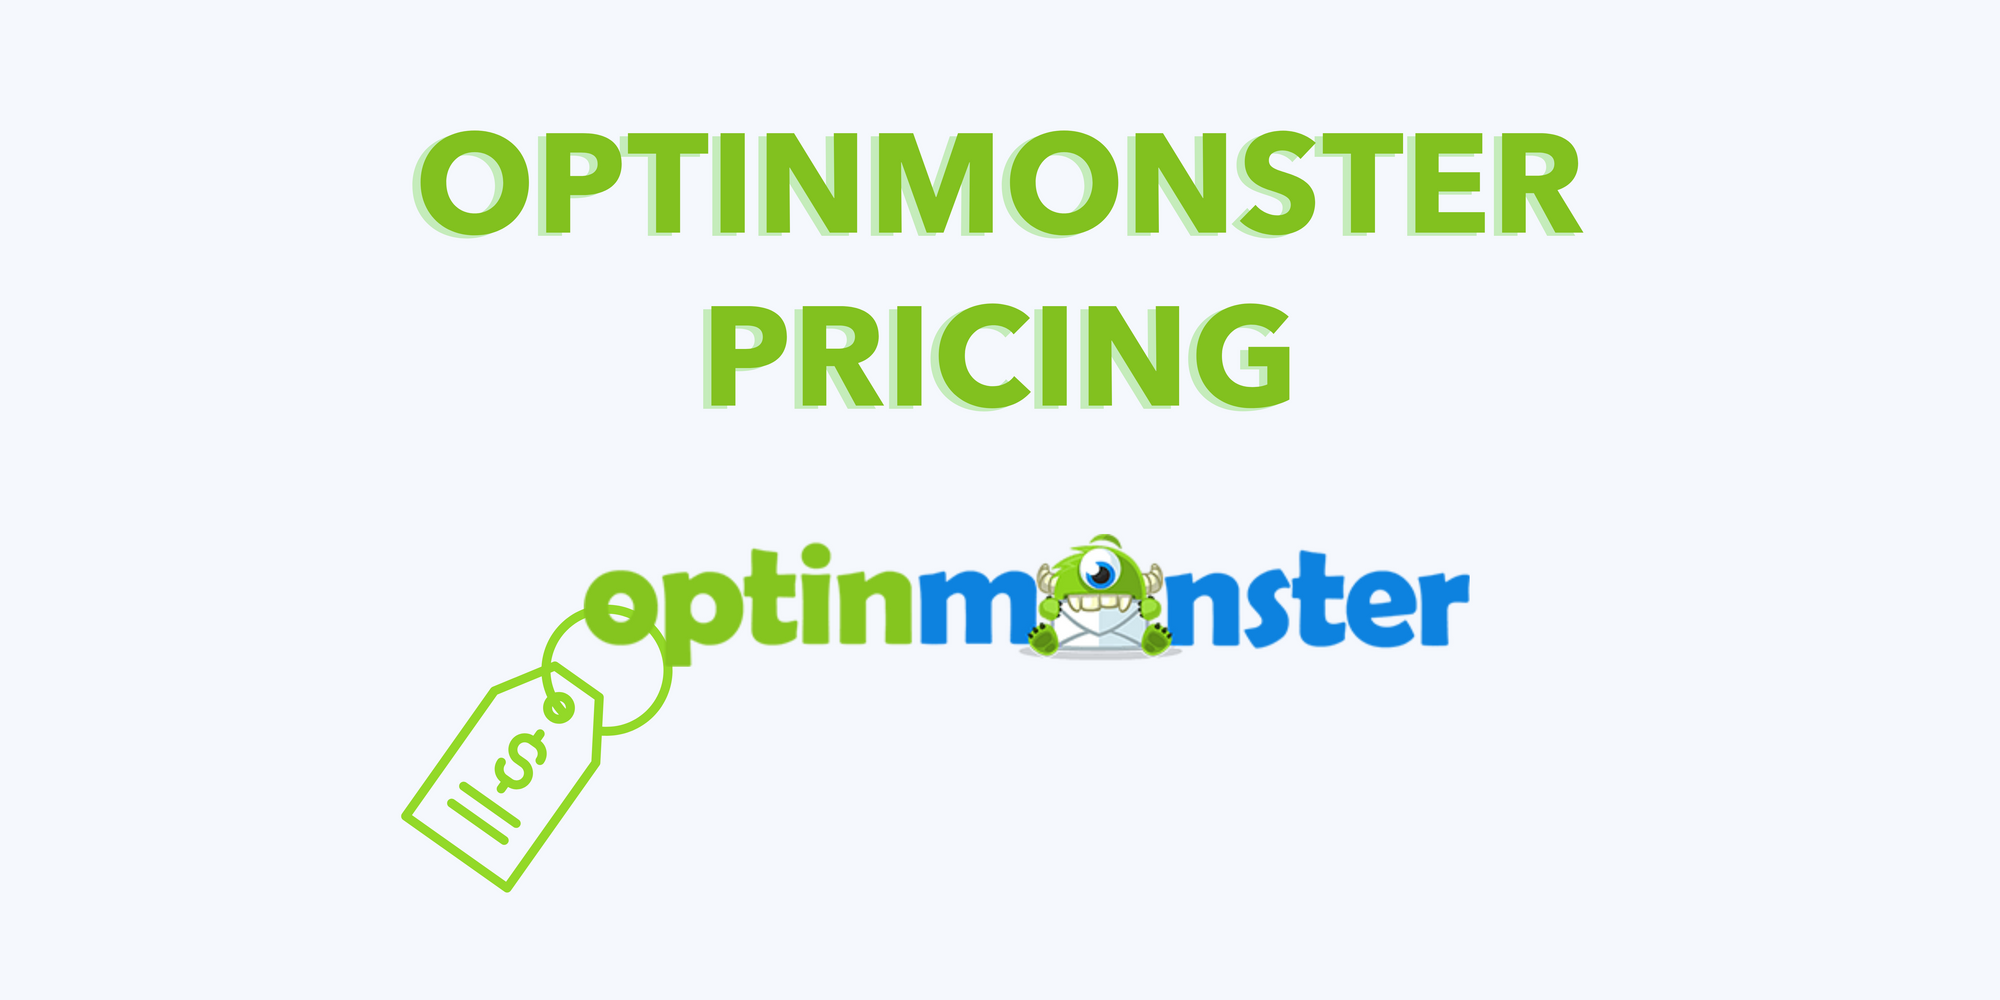 OptinMonster icon with price icon to emphasize the pricing plans on blue background